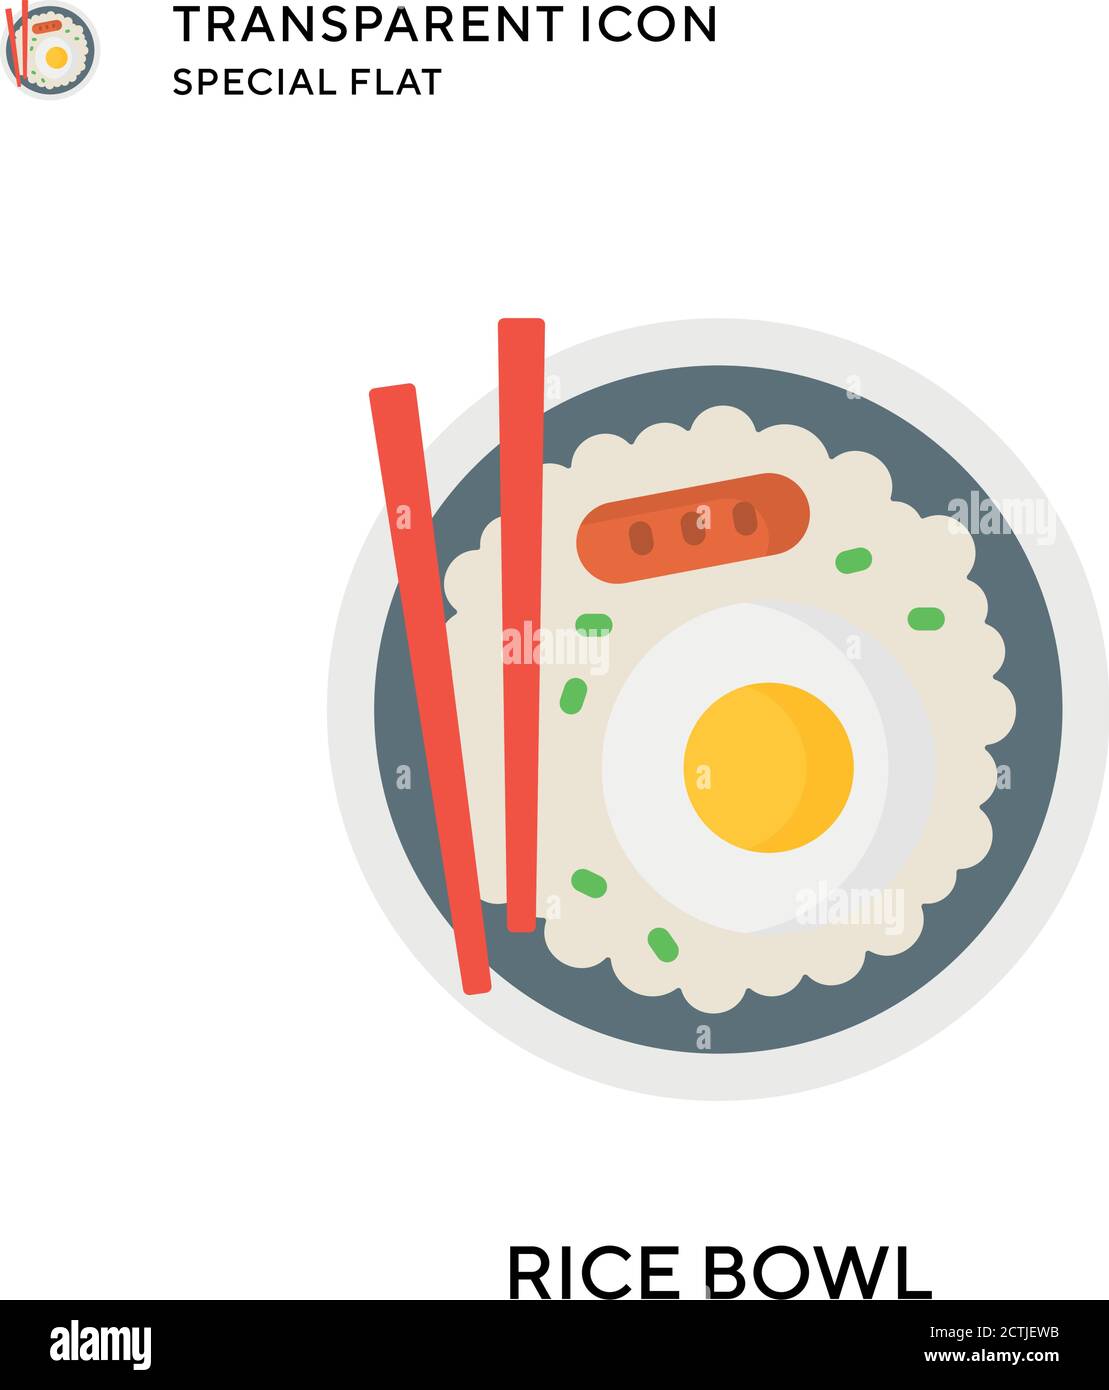 Rice bowl vector icon. Flat style illustration. EPS 10 vector. Stock Vector